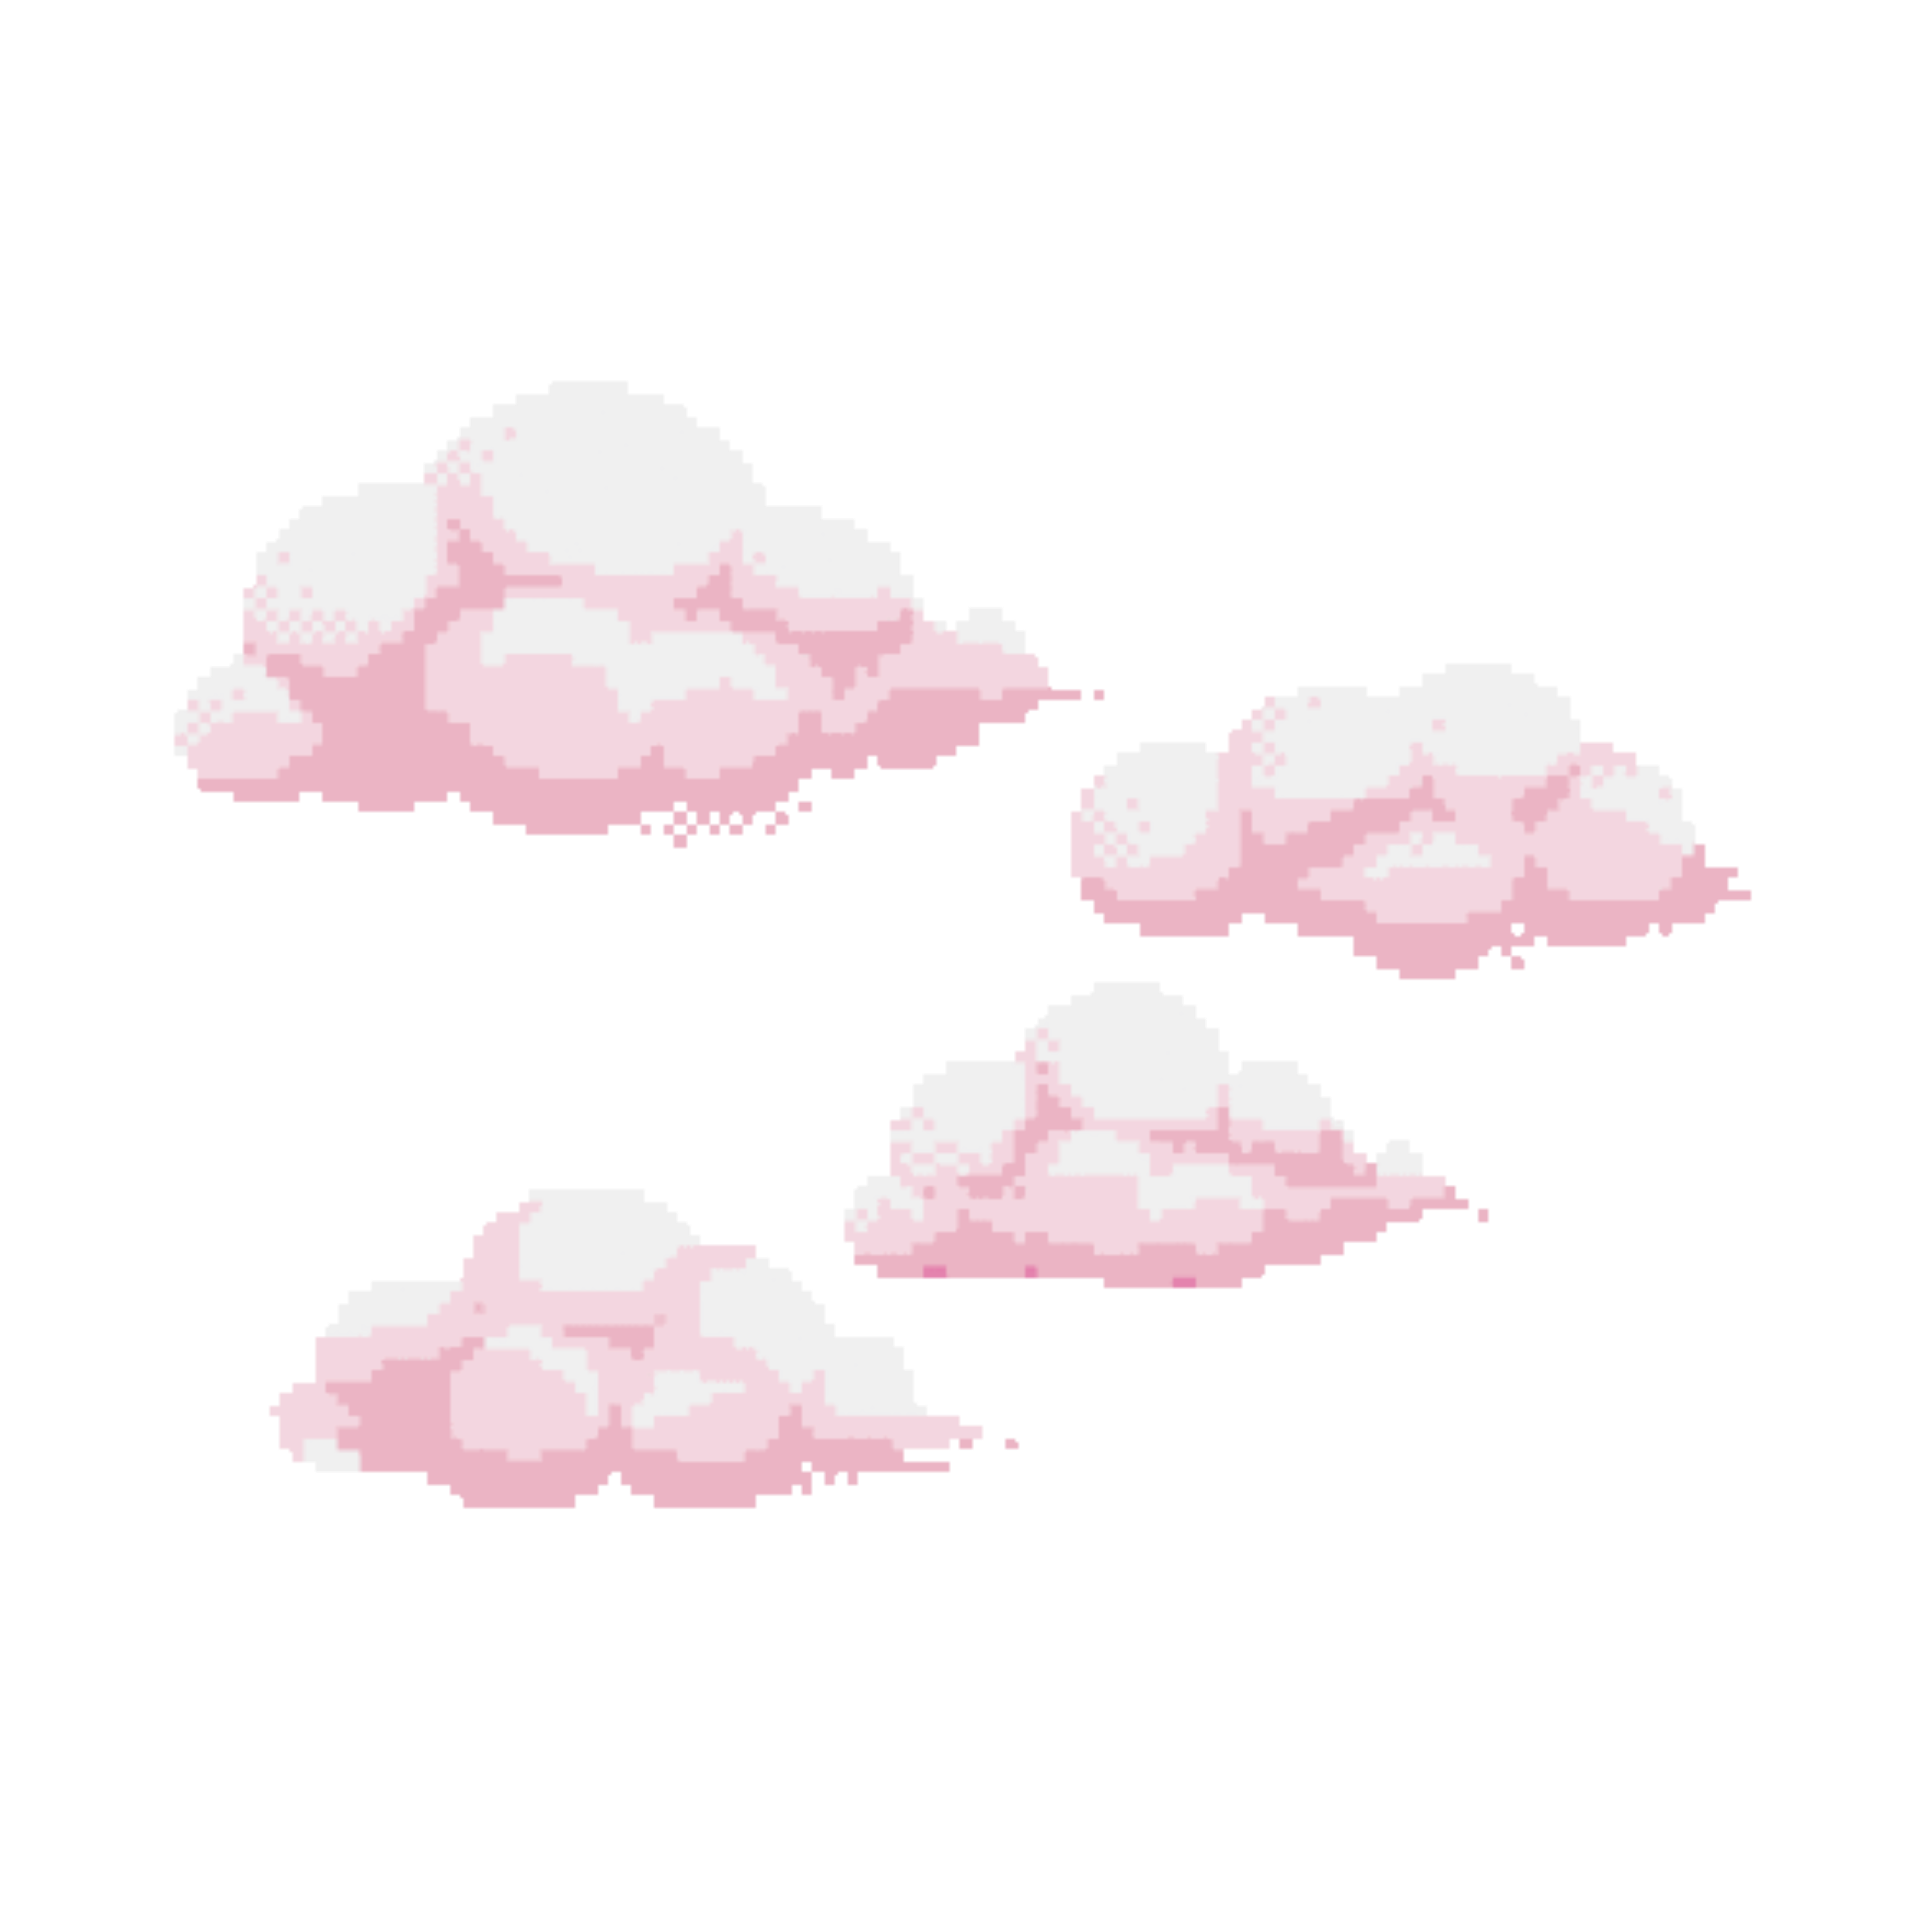 freetoedit pink clouds aesthetic edit cute wow pretty...